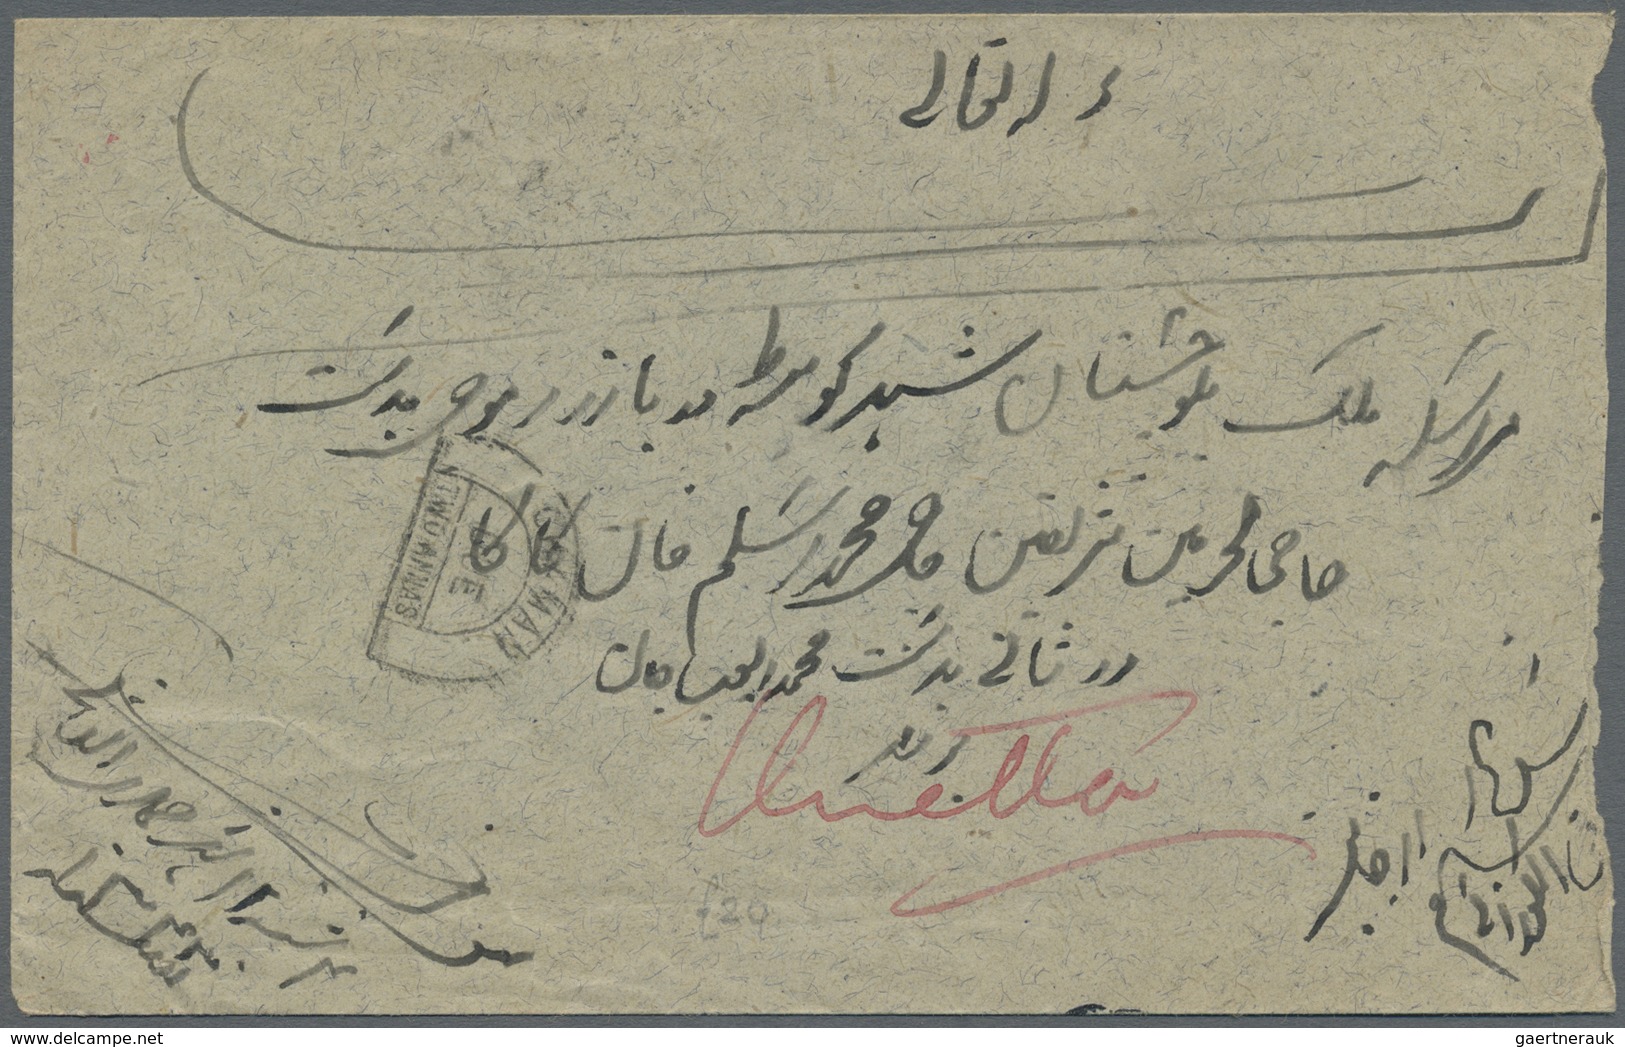 Br Afghanistan: 1909-25 "QUETTA UNPAID": Four covers to India via the southern Chaman-Quetta route but